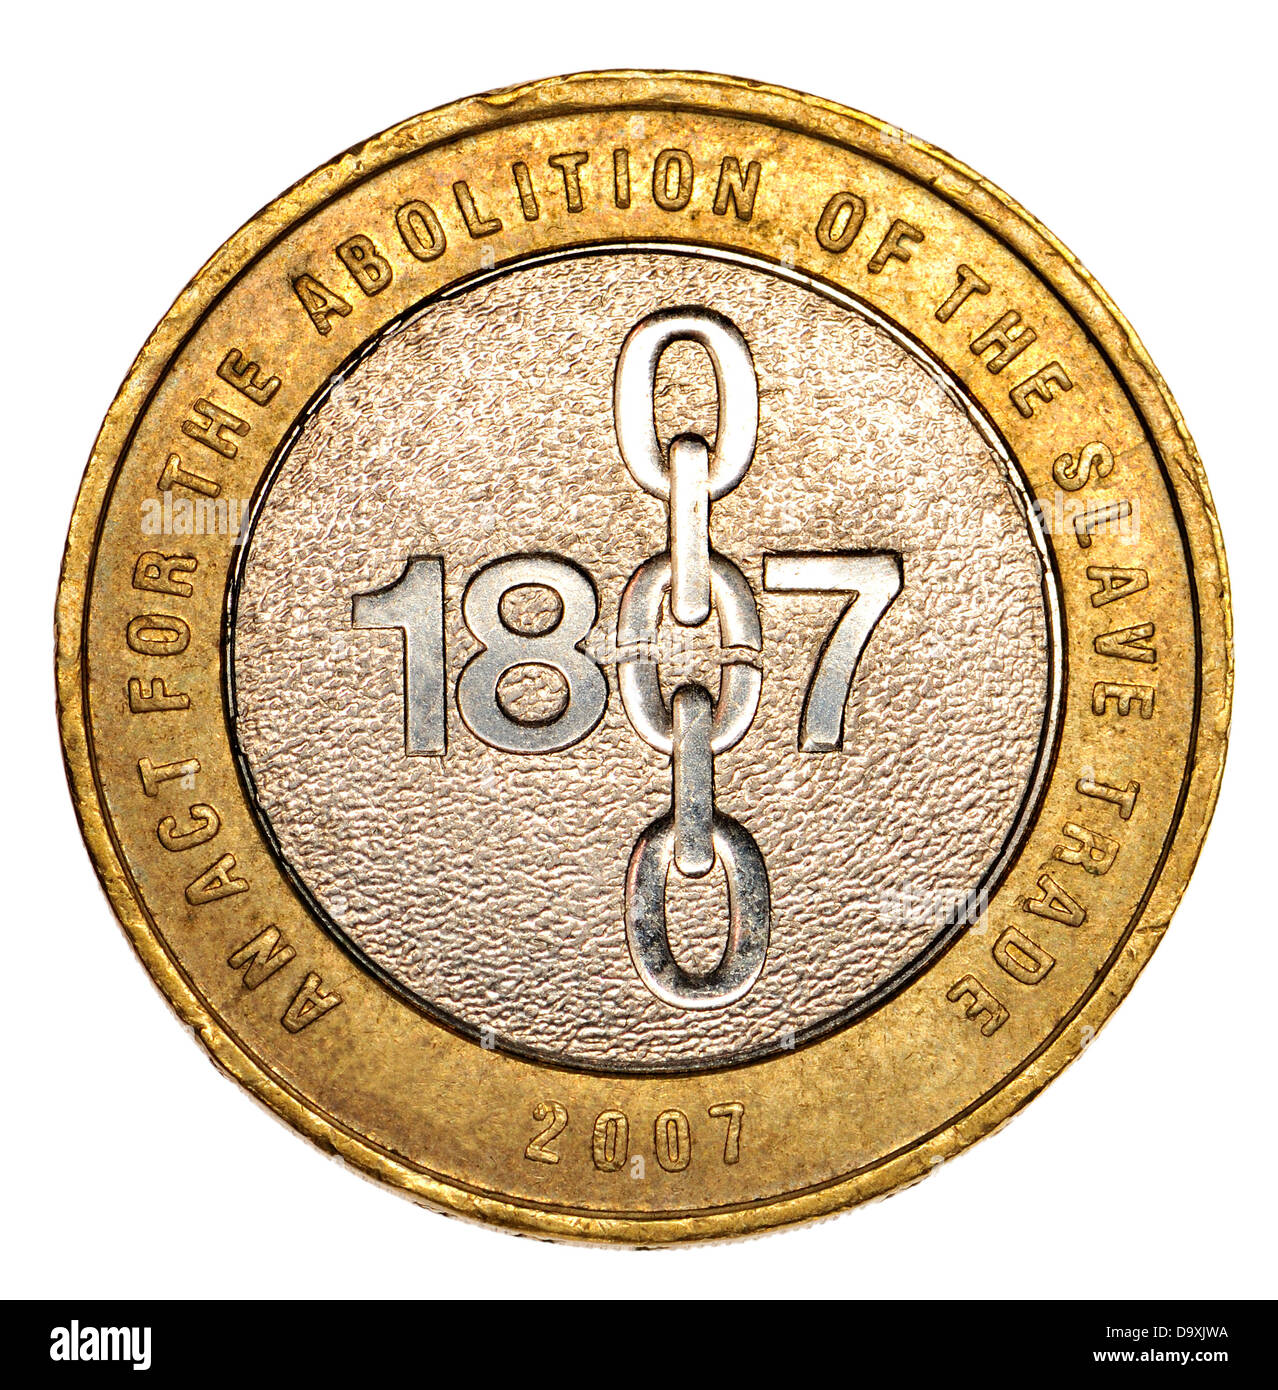 British £2 coin - 2007 - Bicentenary of the Abolition of the Slave Trade in the British Empire. Designed by David Gentleman Stock Photo